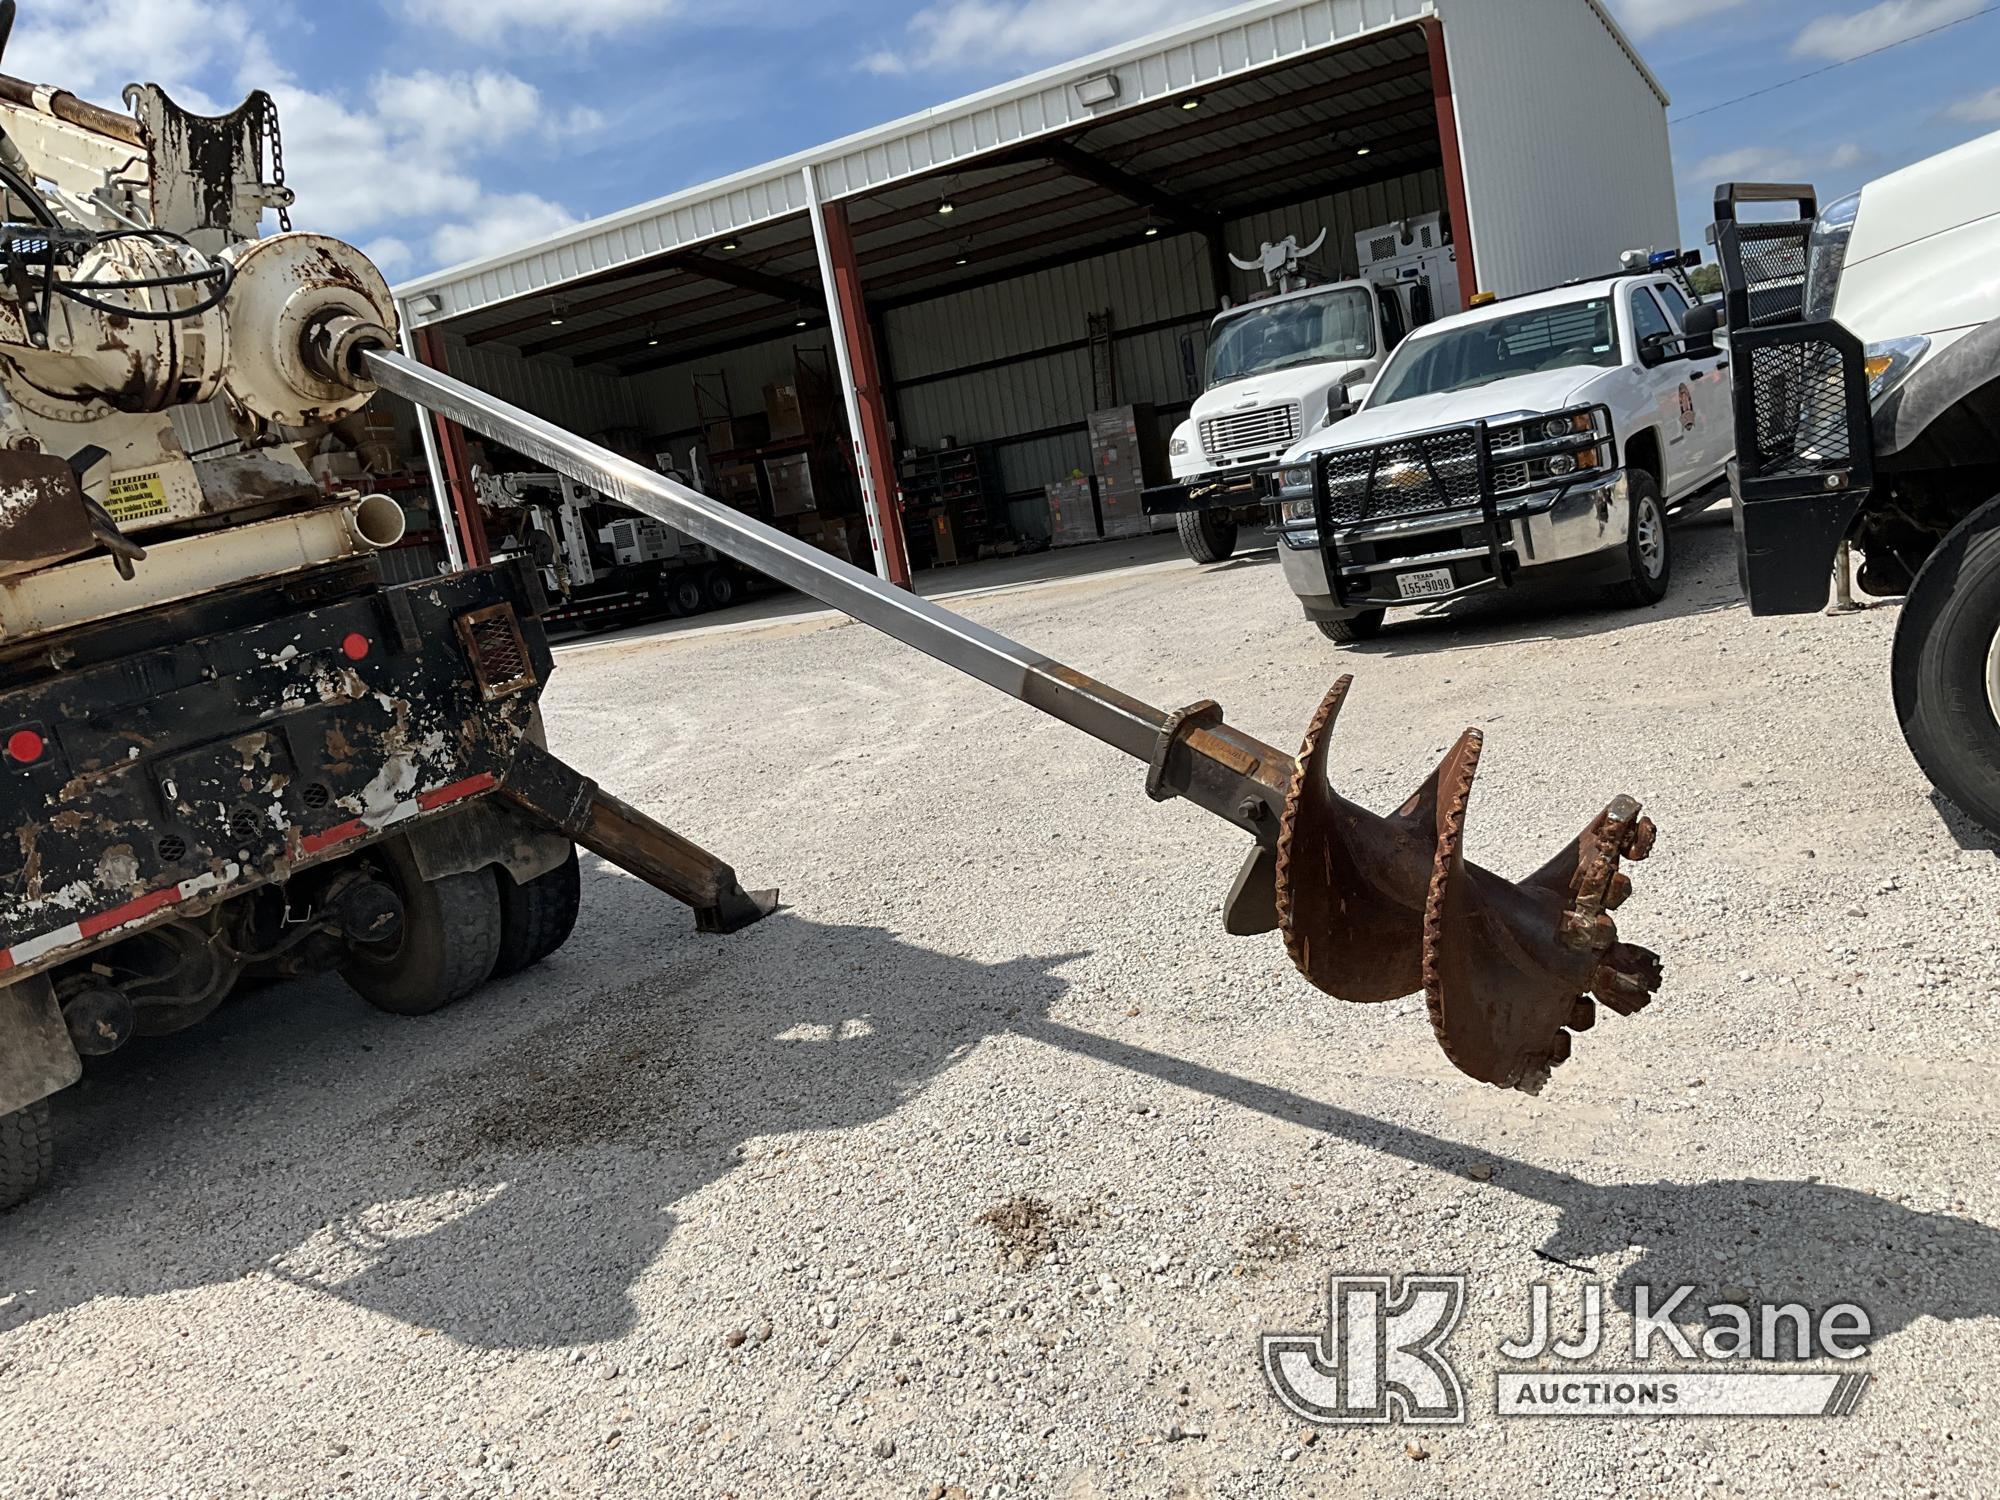 (Azle, TX) Terex/Redrill 330-12, Pressure Digger mounted on 2008 International 7400 6x6 Cab & Chassi